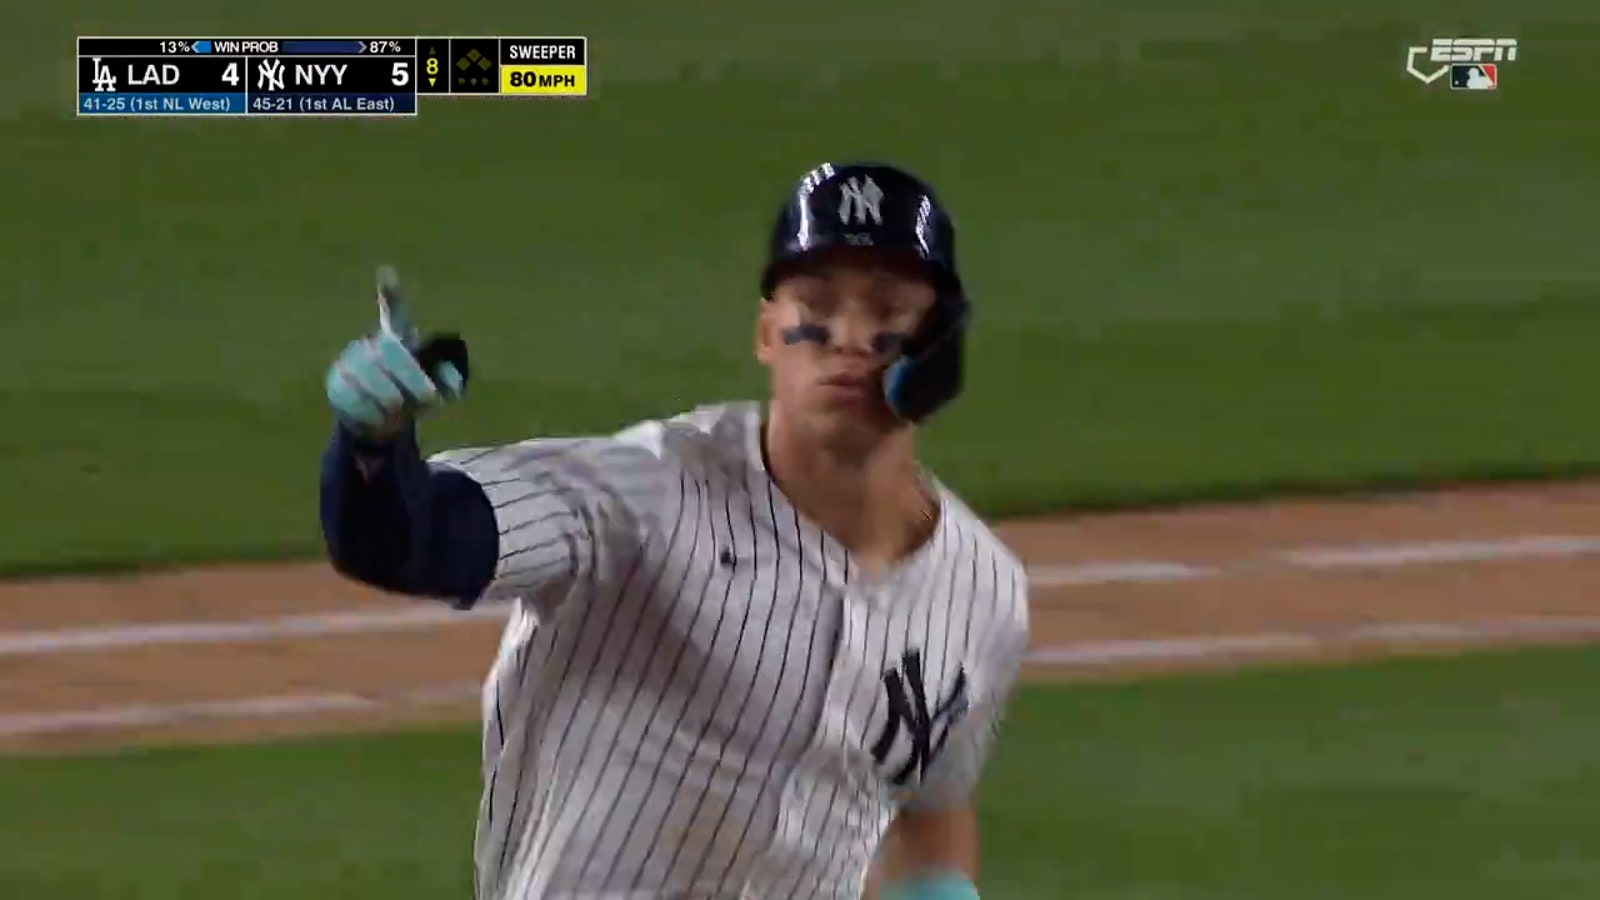 Aaron Judge mashes solo homer to extend Yankees' lead over Dodgers